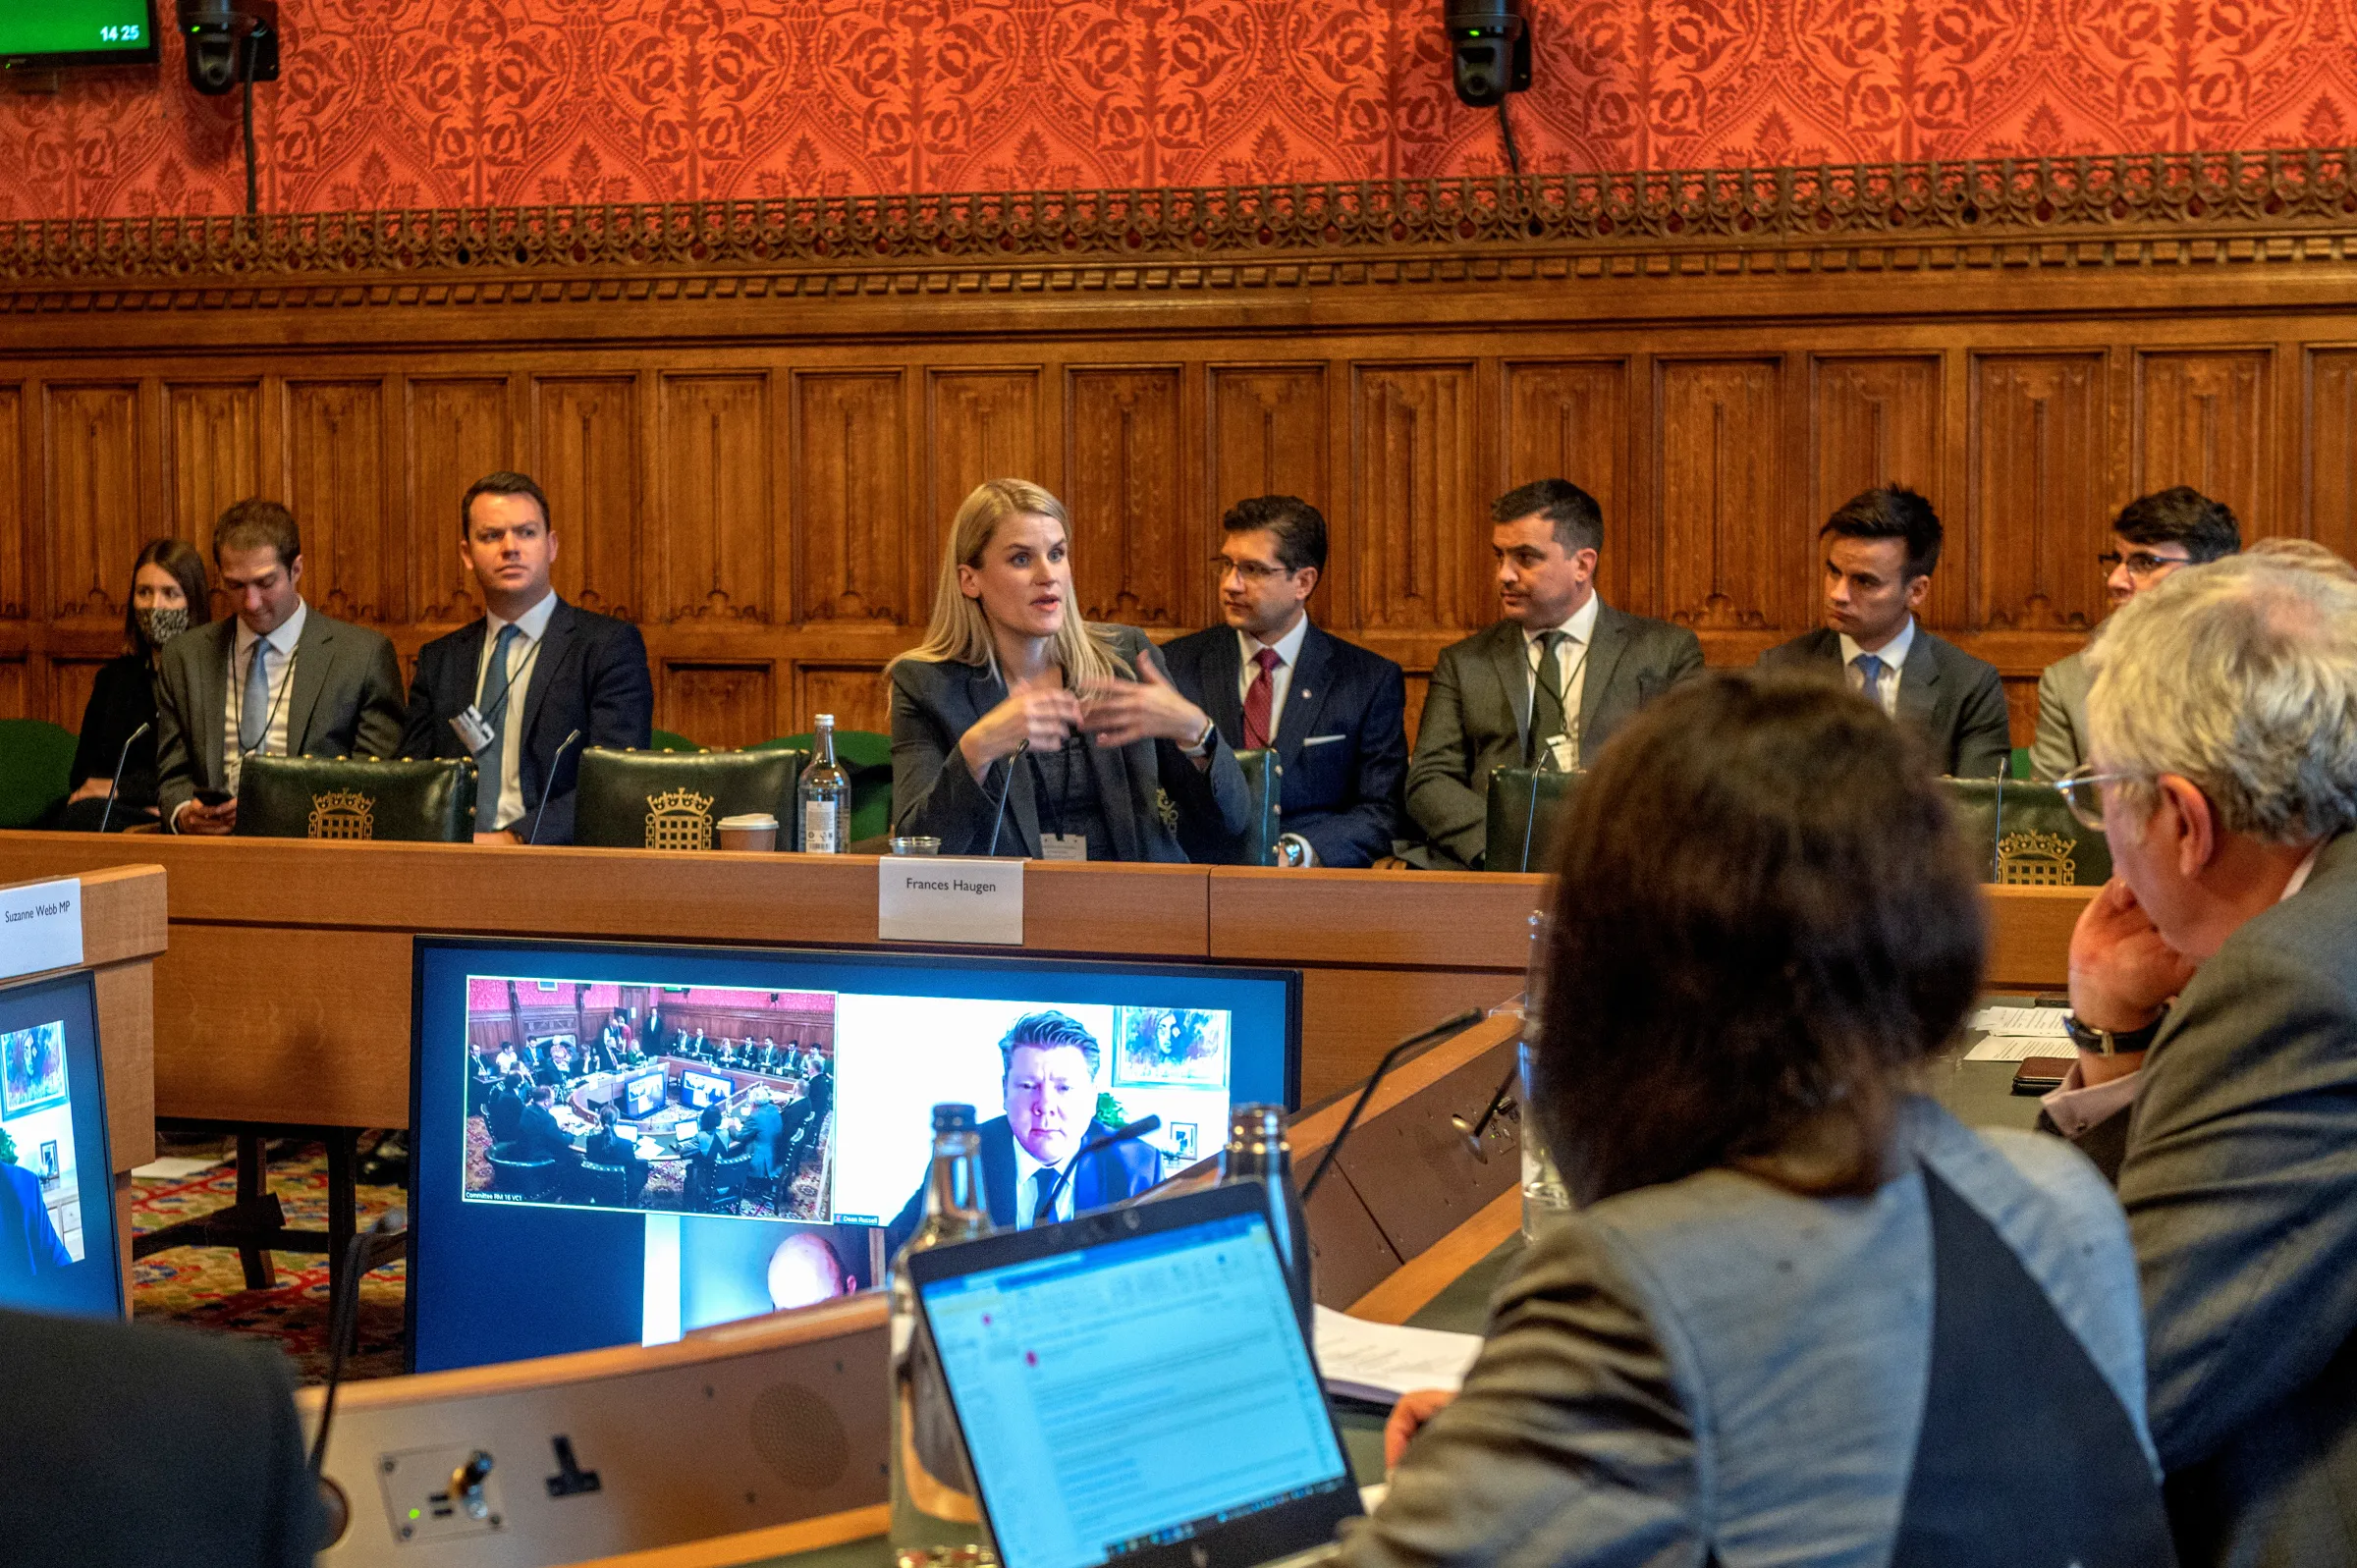 Former Facebook employee Frances Haugen gives evidence to the Joint Committee on the Draft Online Safety Bill of UK Parliament that is examining plans to regulate social media companies, in London, Britain October 25, 2021. UK Parliament 2021/Annabel Moeller/Handout via REUTERS